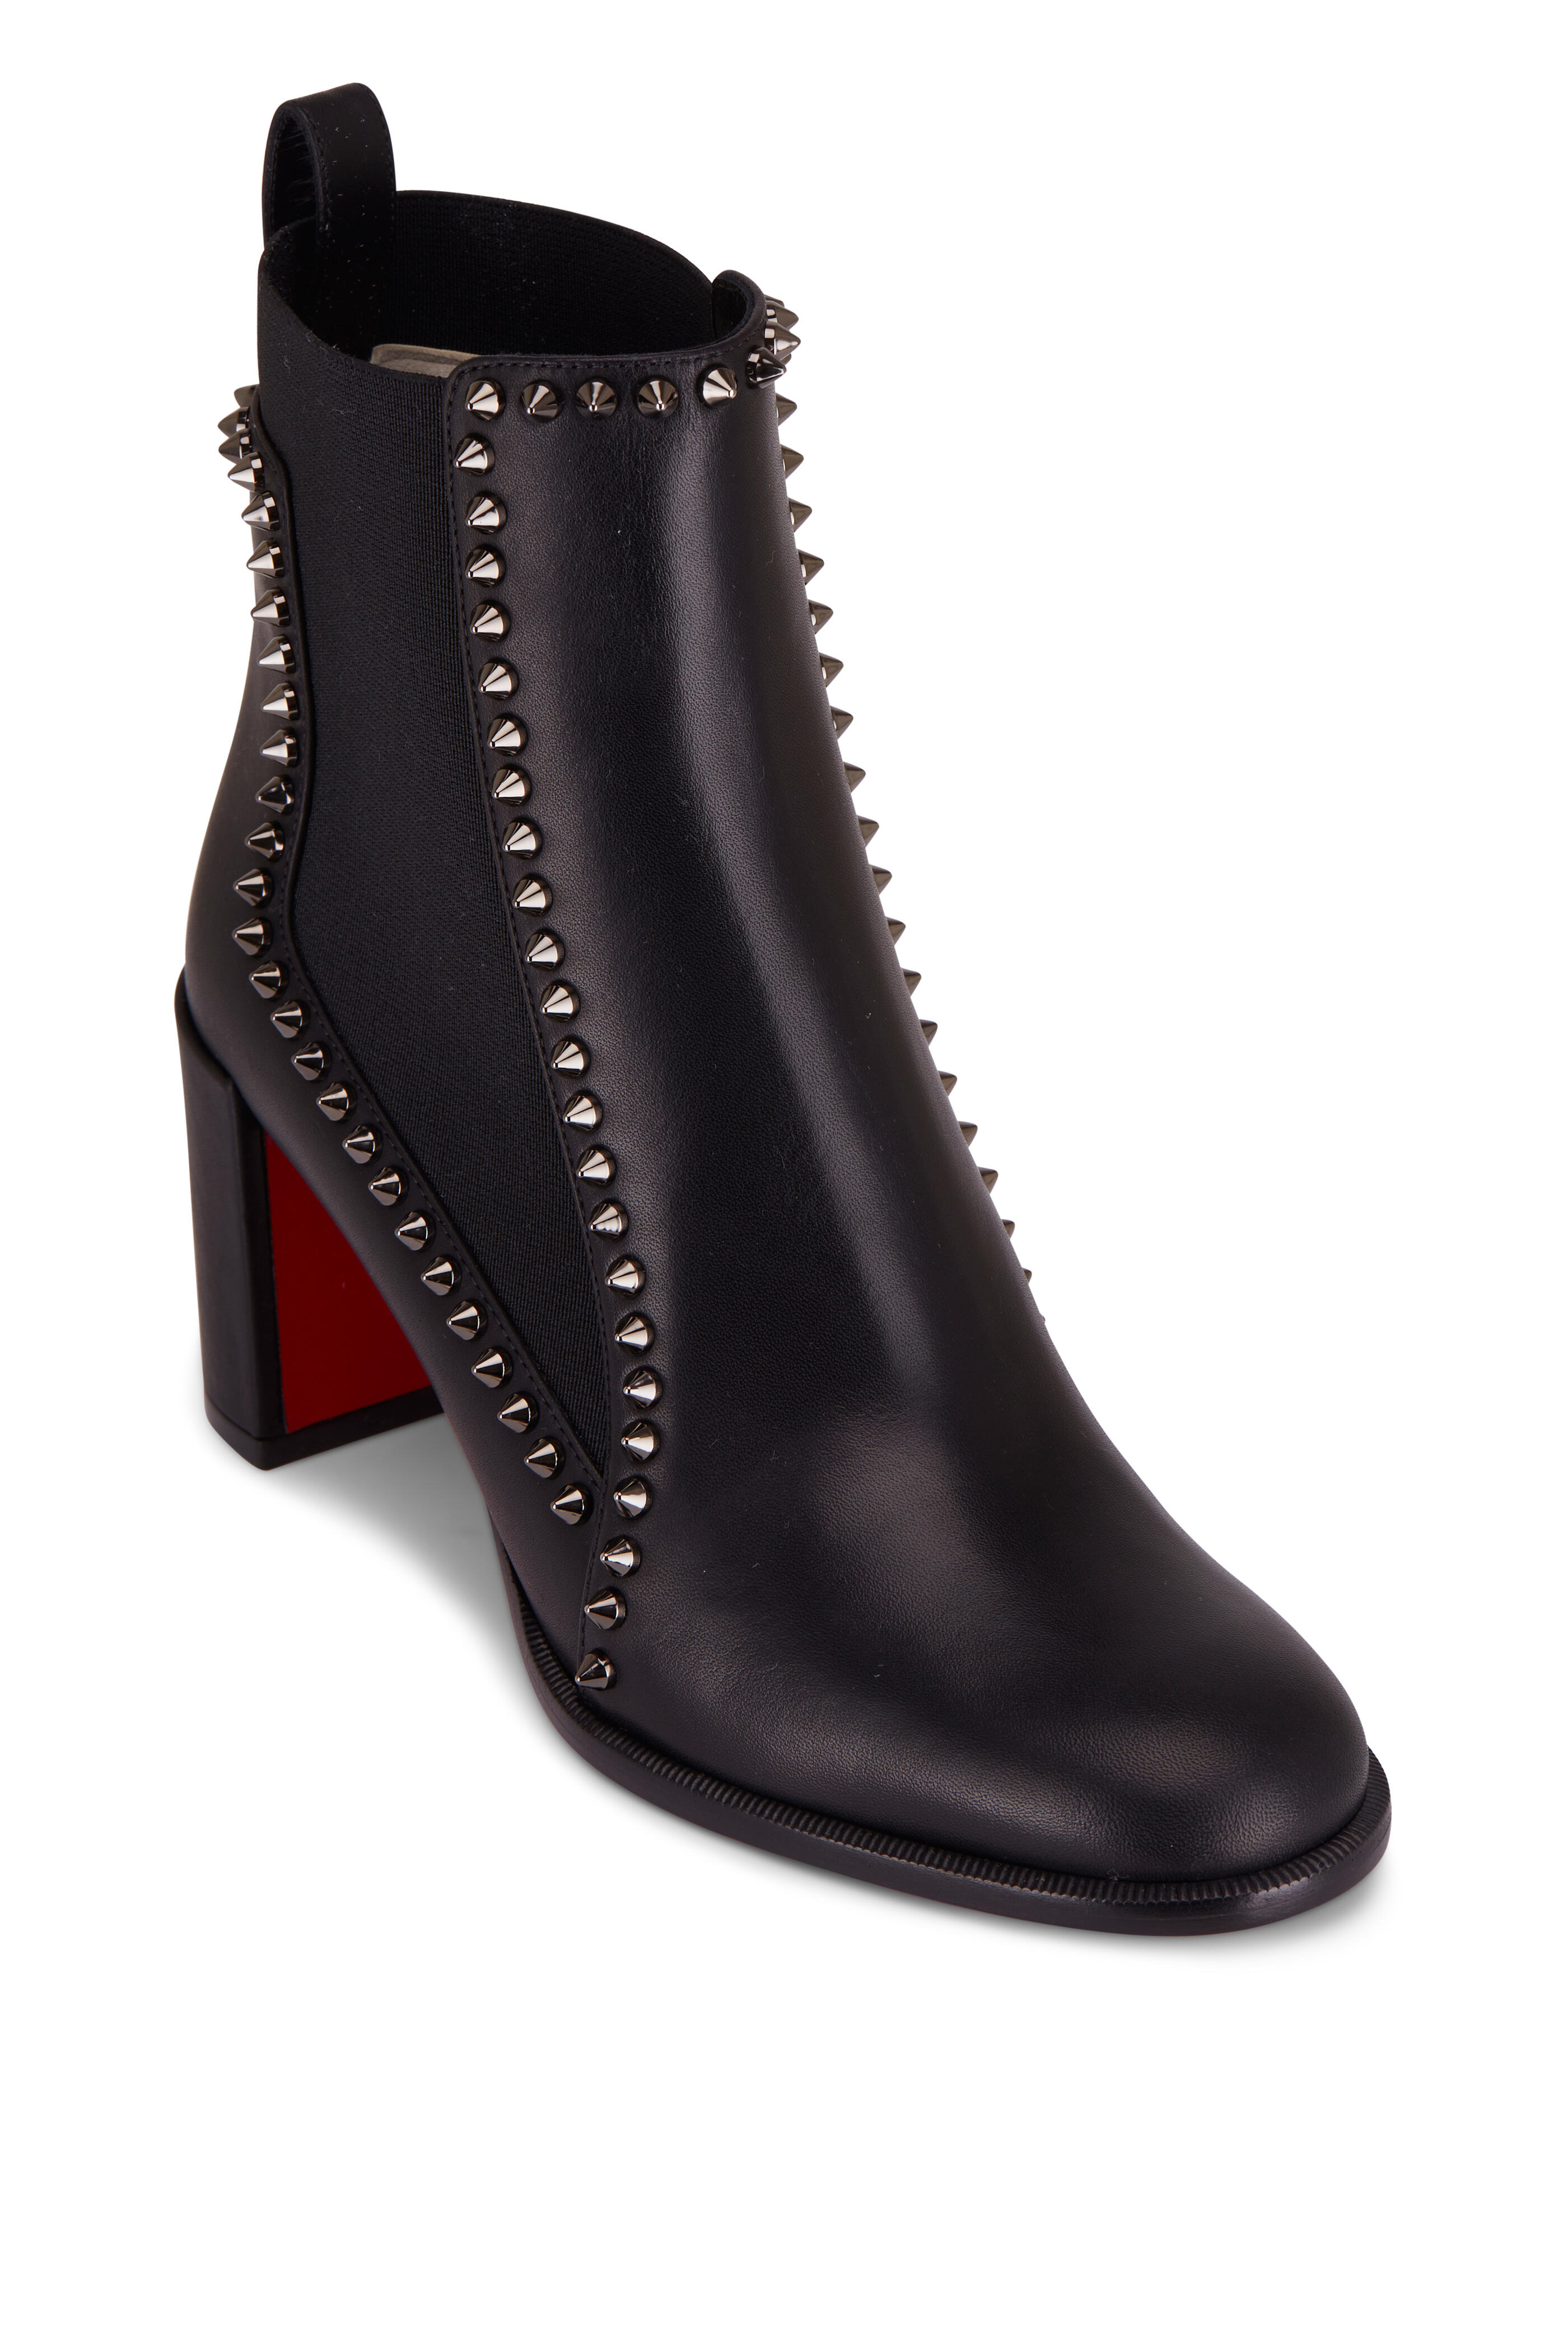 Studded Leather Boots in Black - Christian Louboutin